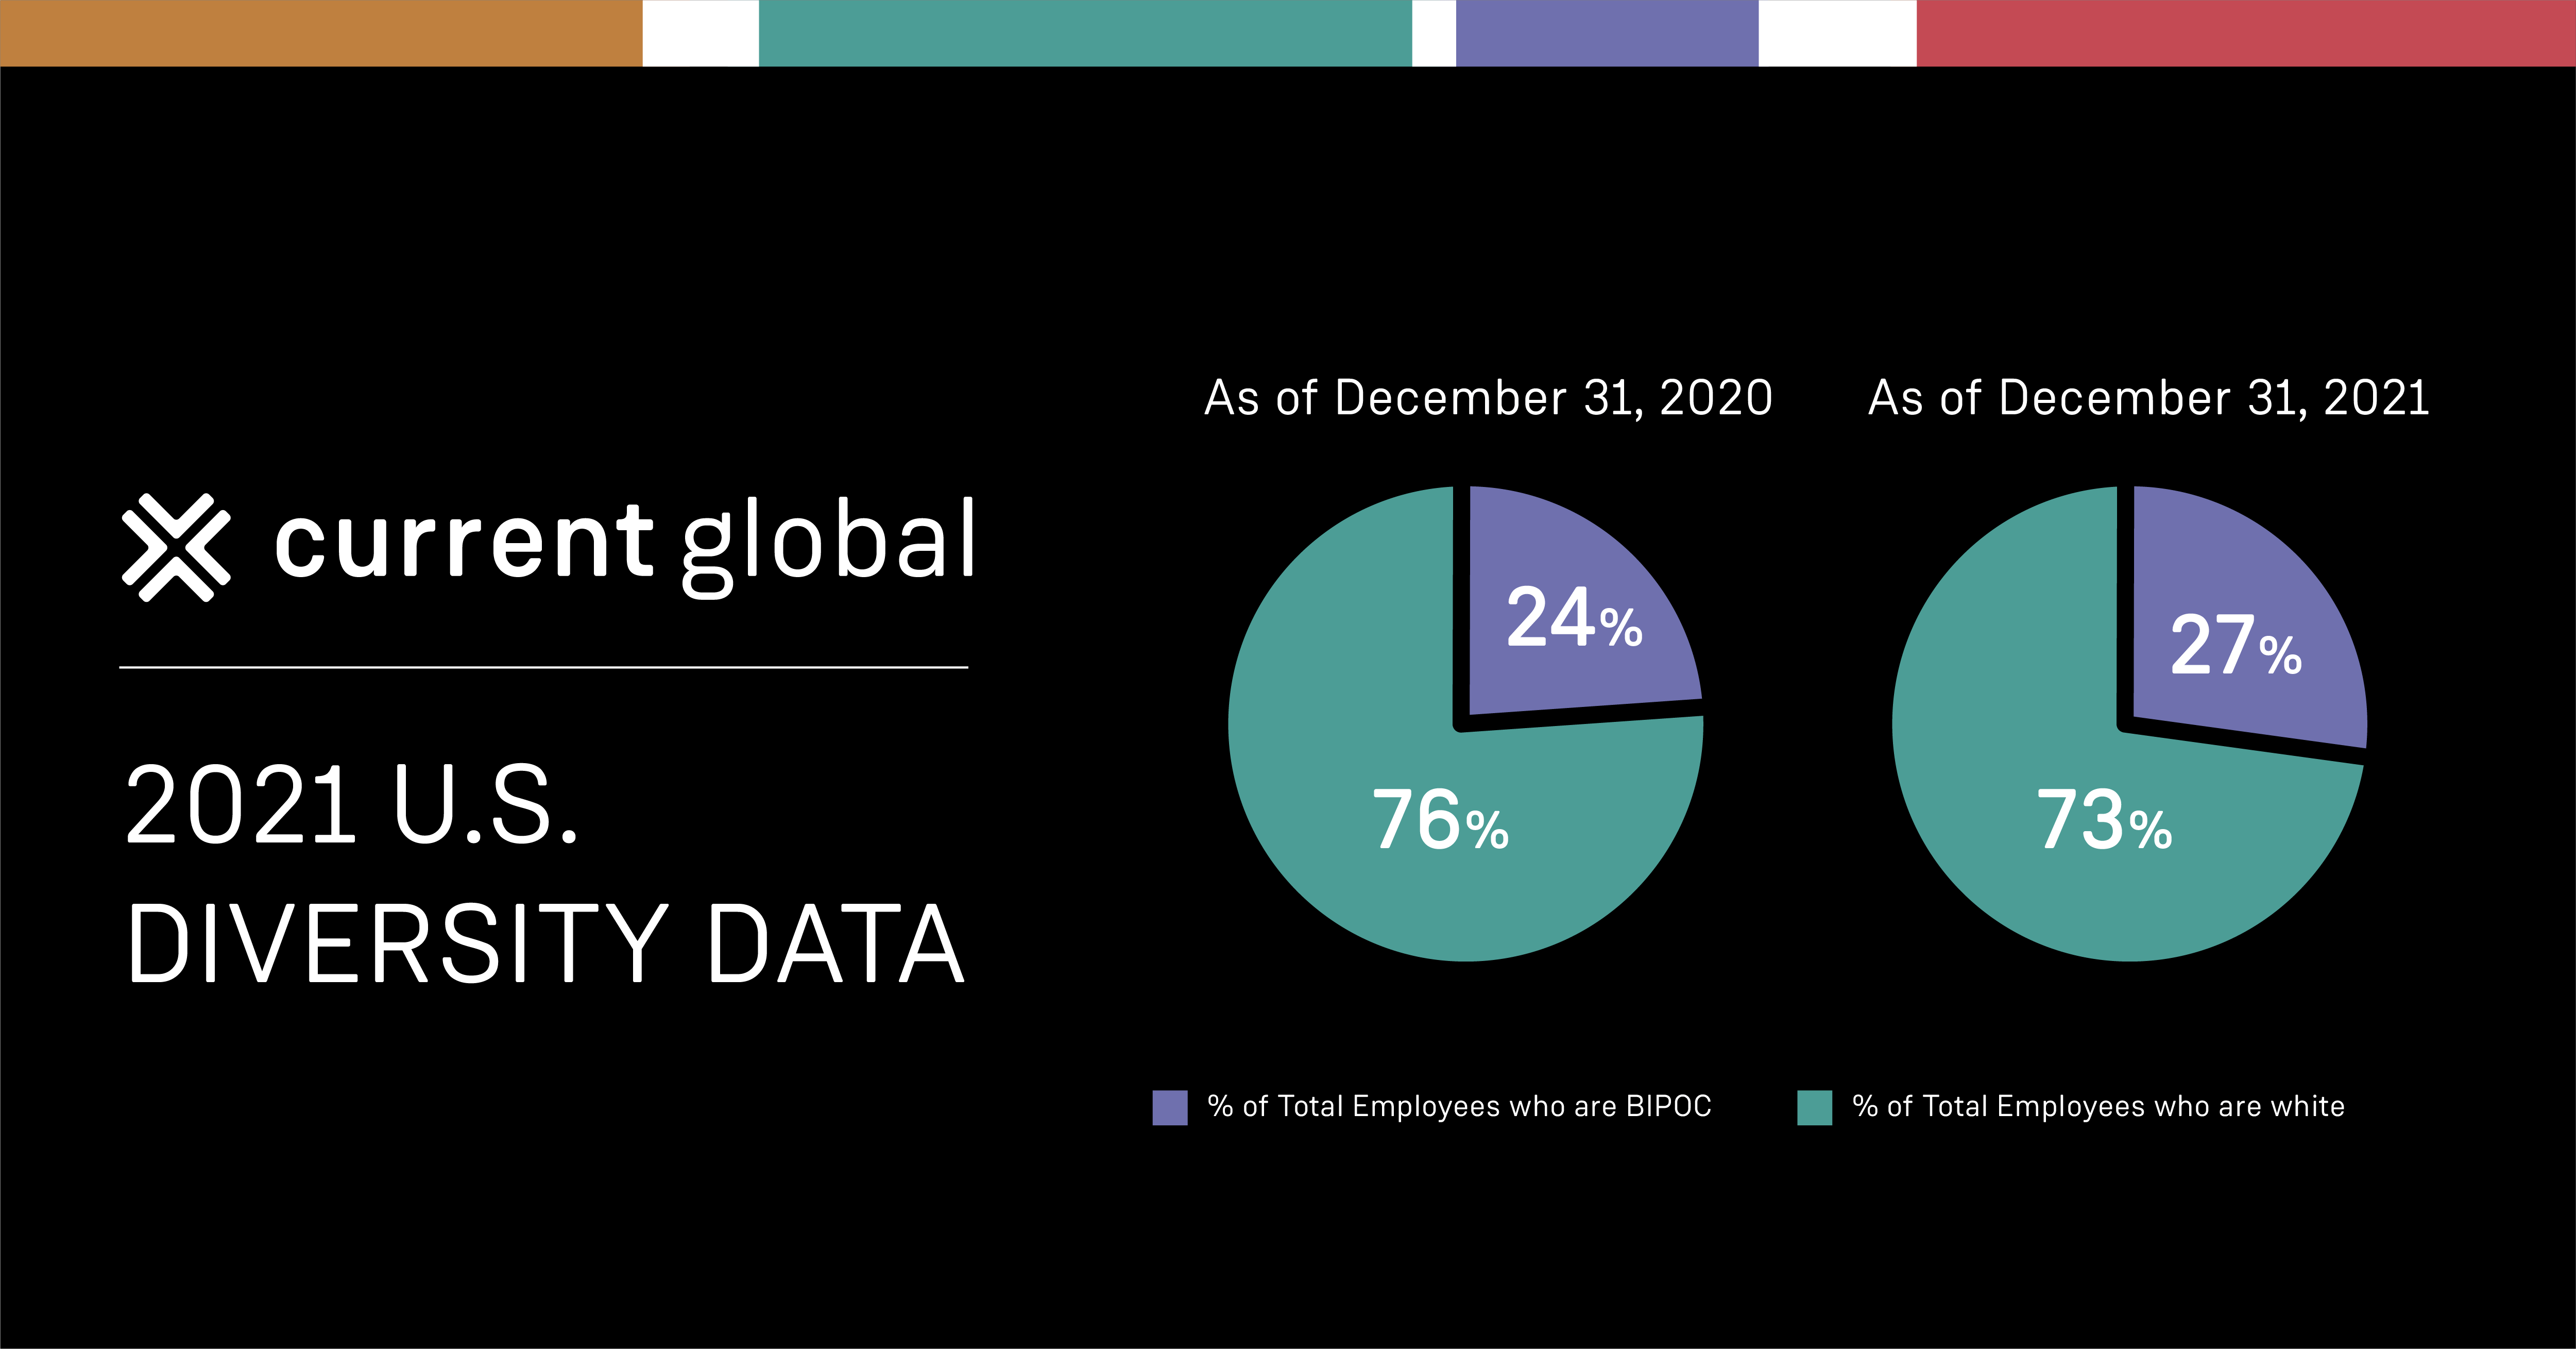 Pie charts showing Current Global diversity data for the US in 2021. BIPOC staff numbers have increased from 24% to 27%.